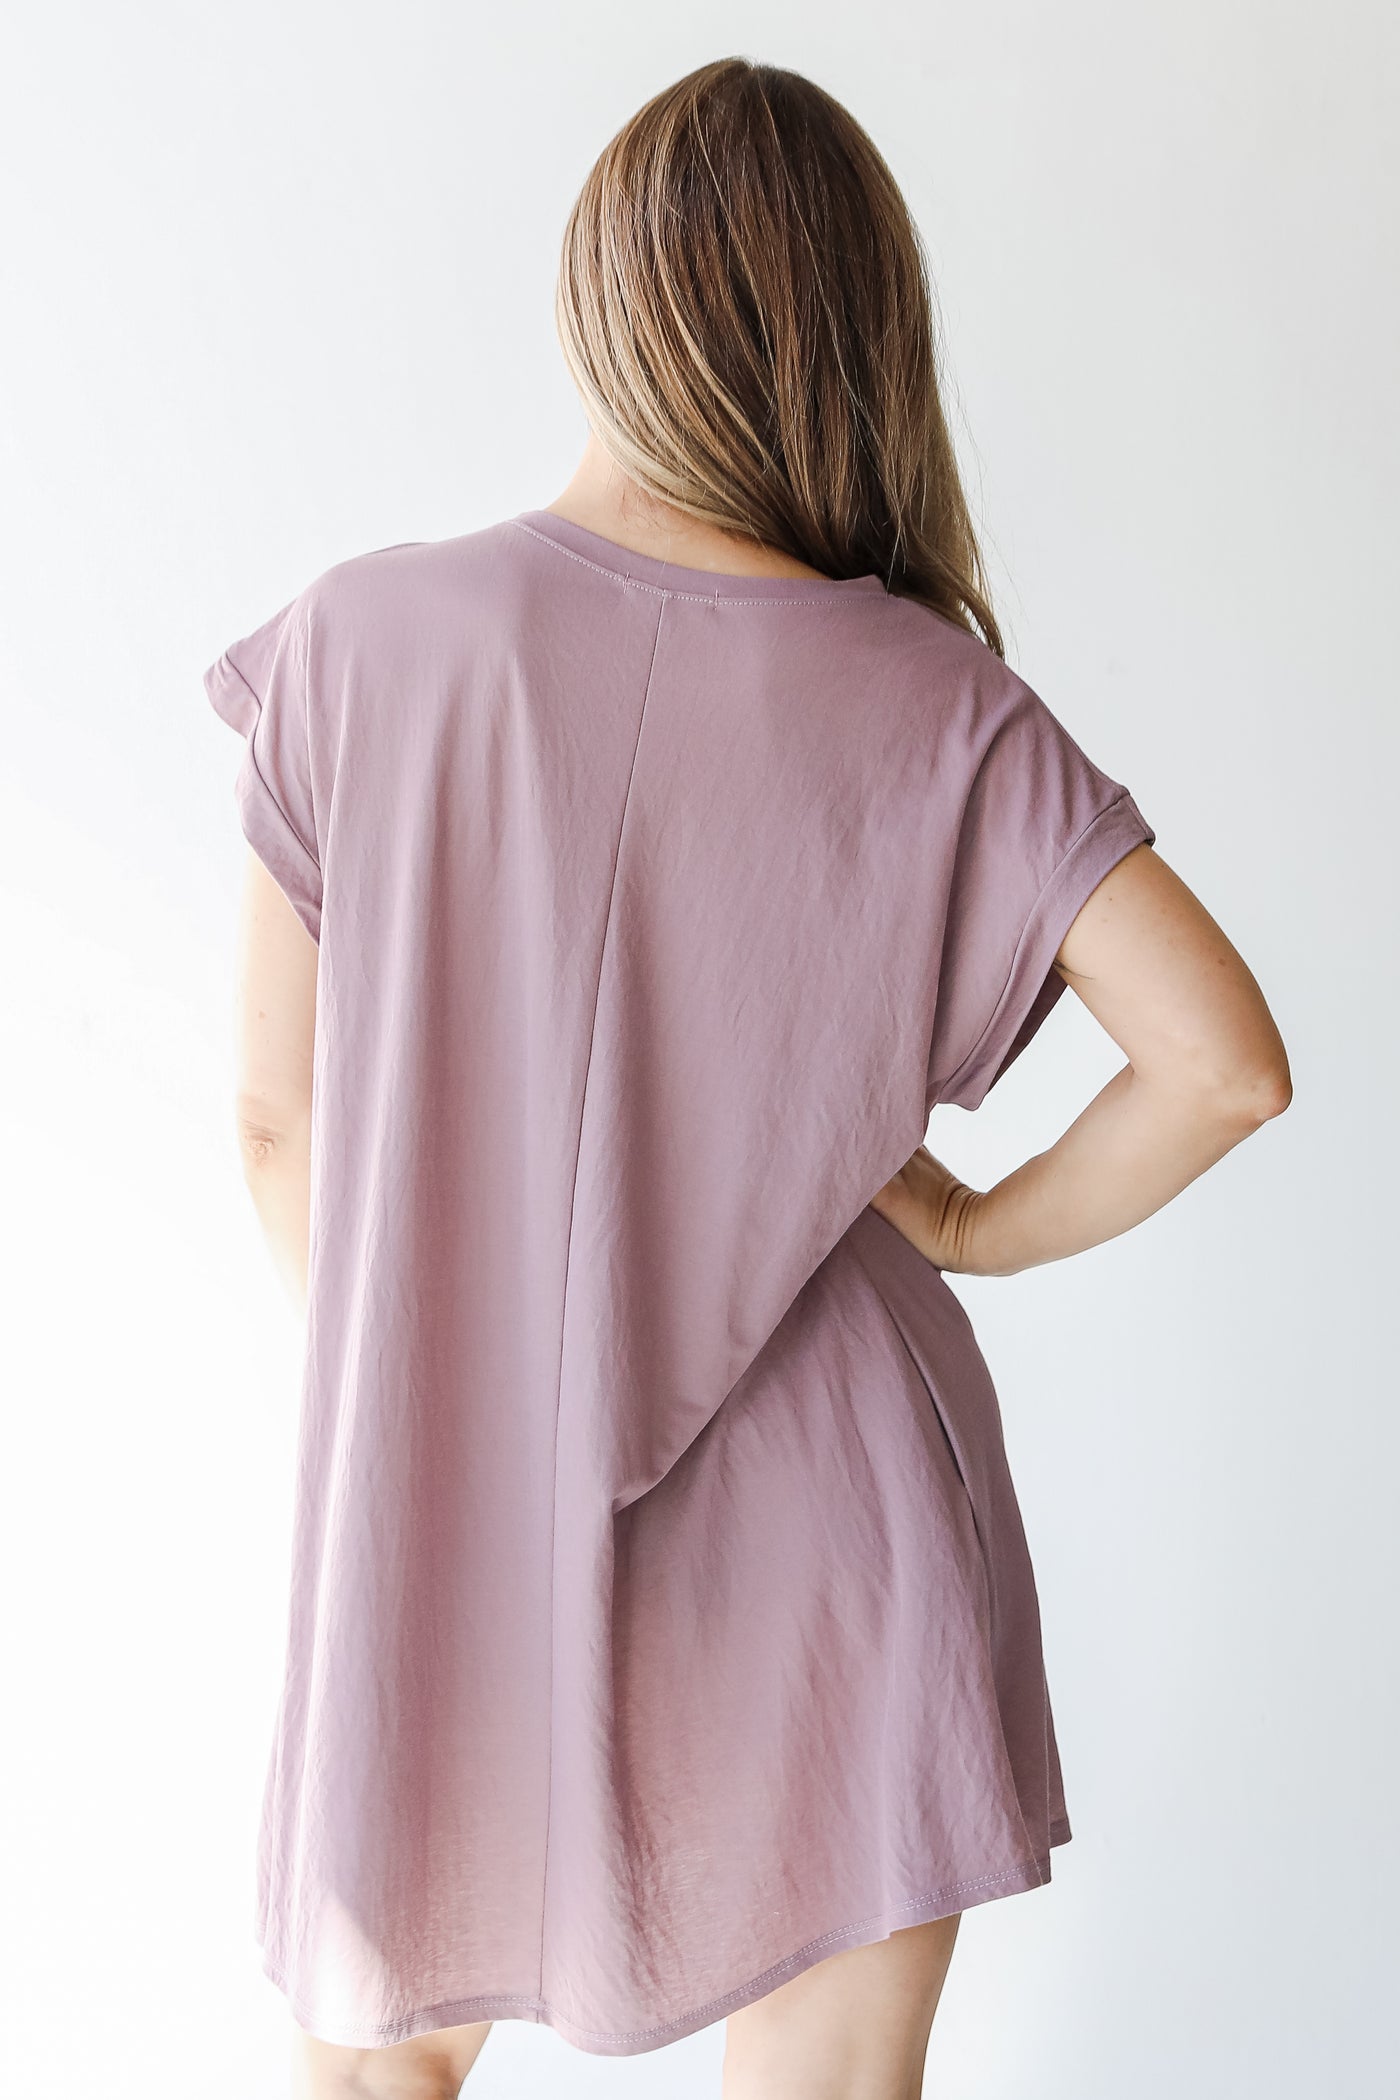 T-Shirt Dress in lavender back view